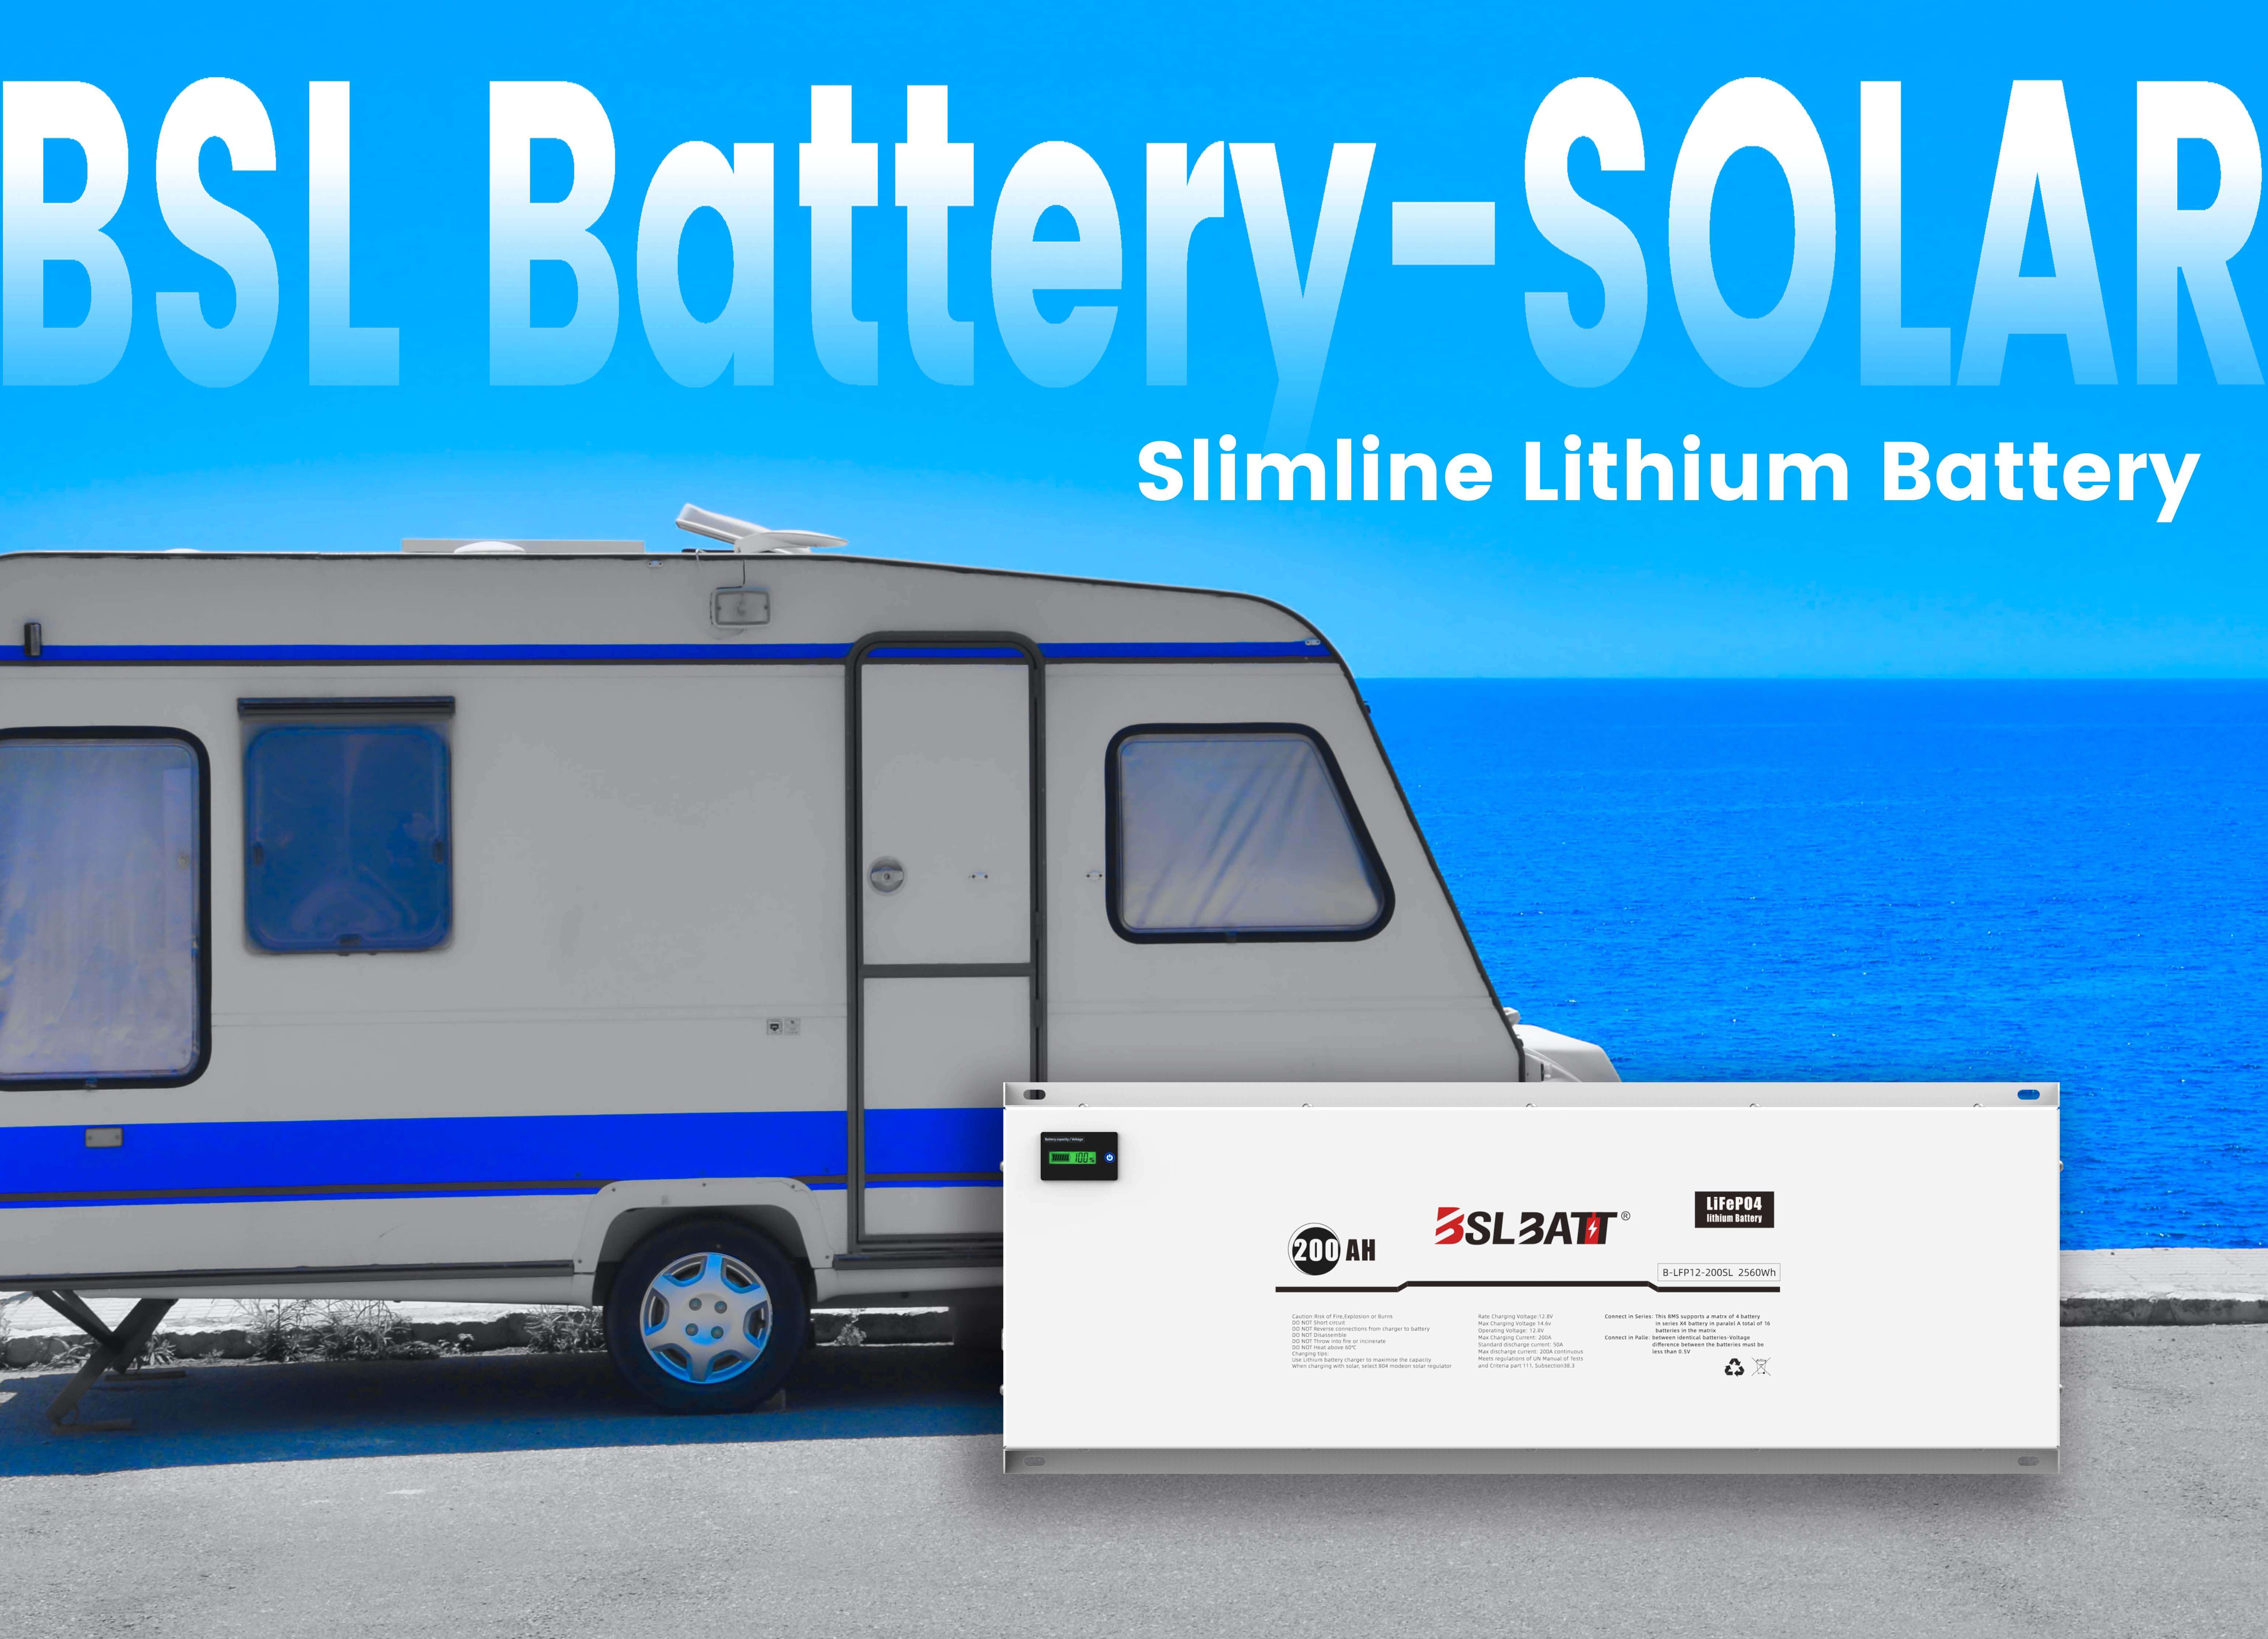 What You Need To Convert Your RV To Lithium Batteries